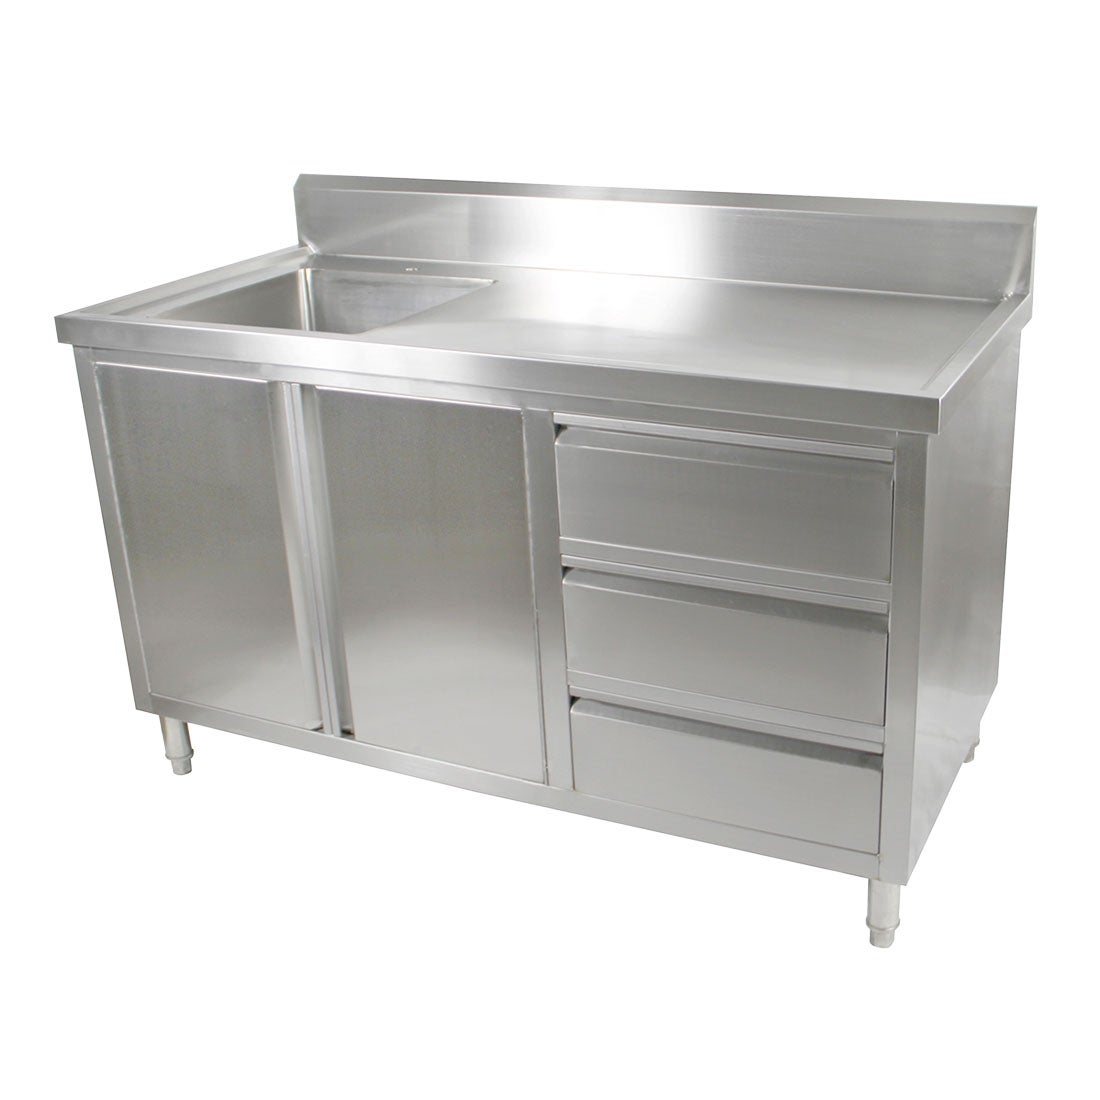 Comchef SC-6-1500L-H Cabinet with Left Sink